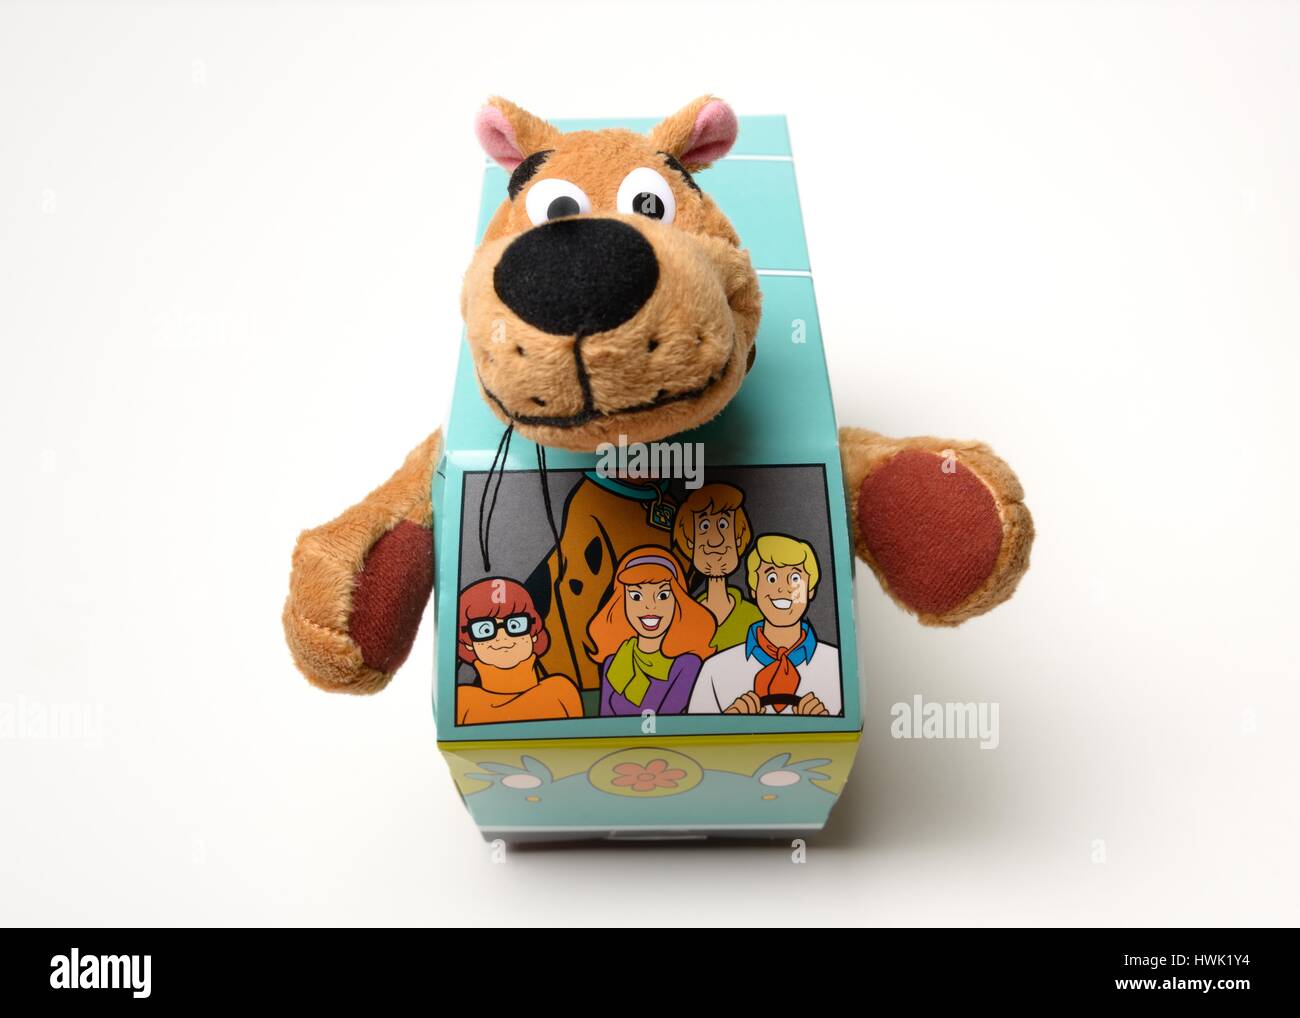 Scooby Doo easter egg box with soft toy included Stock Photo